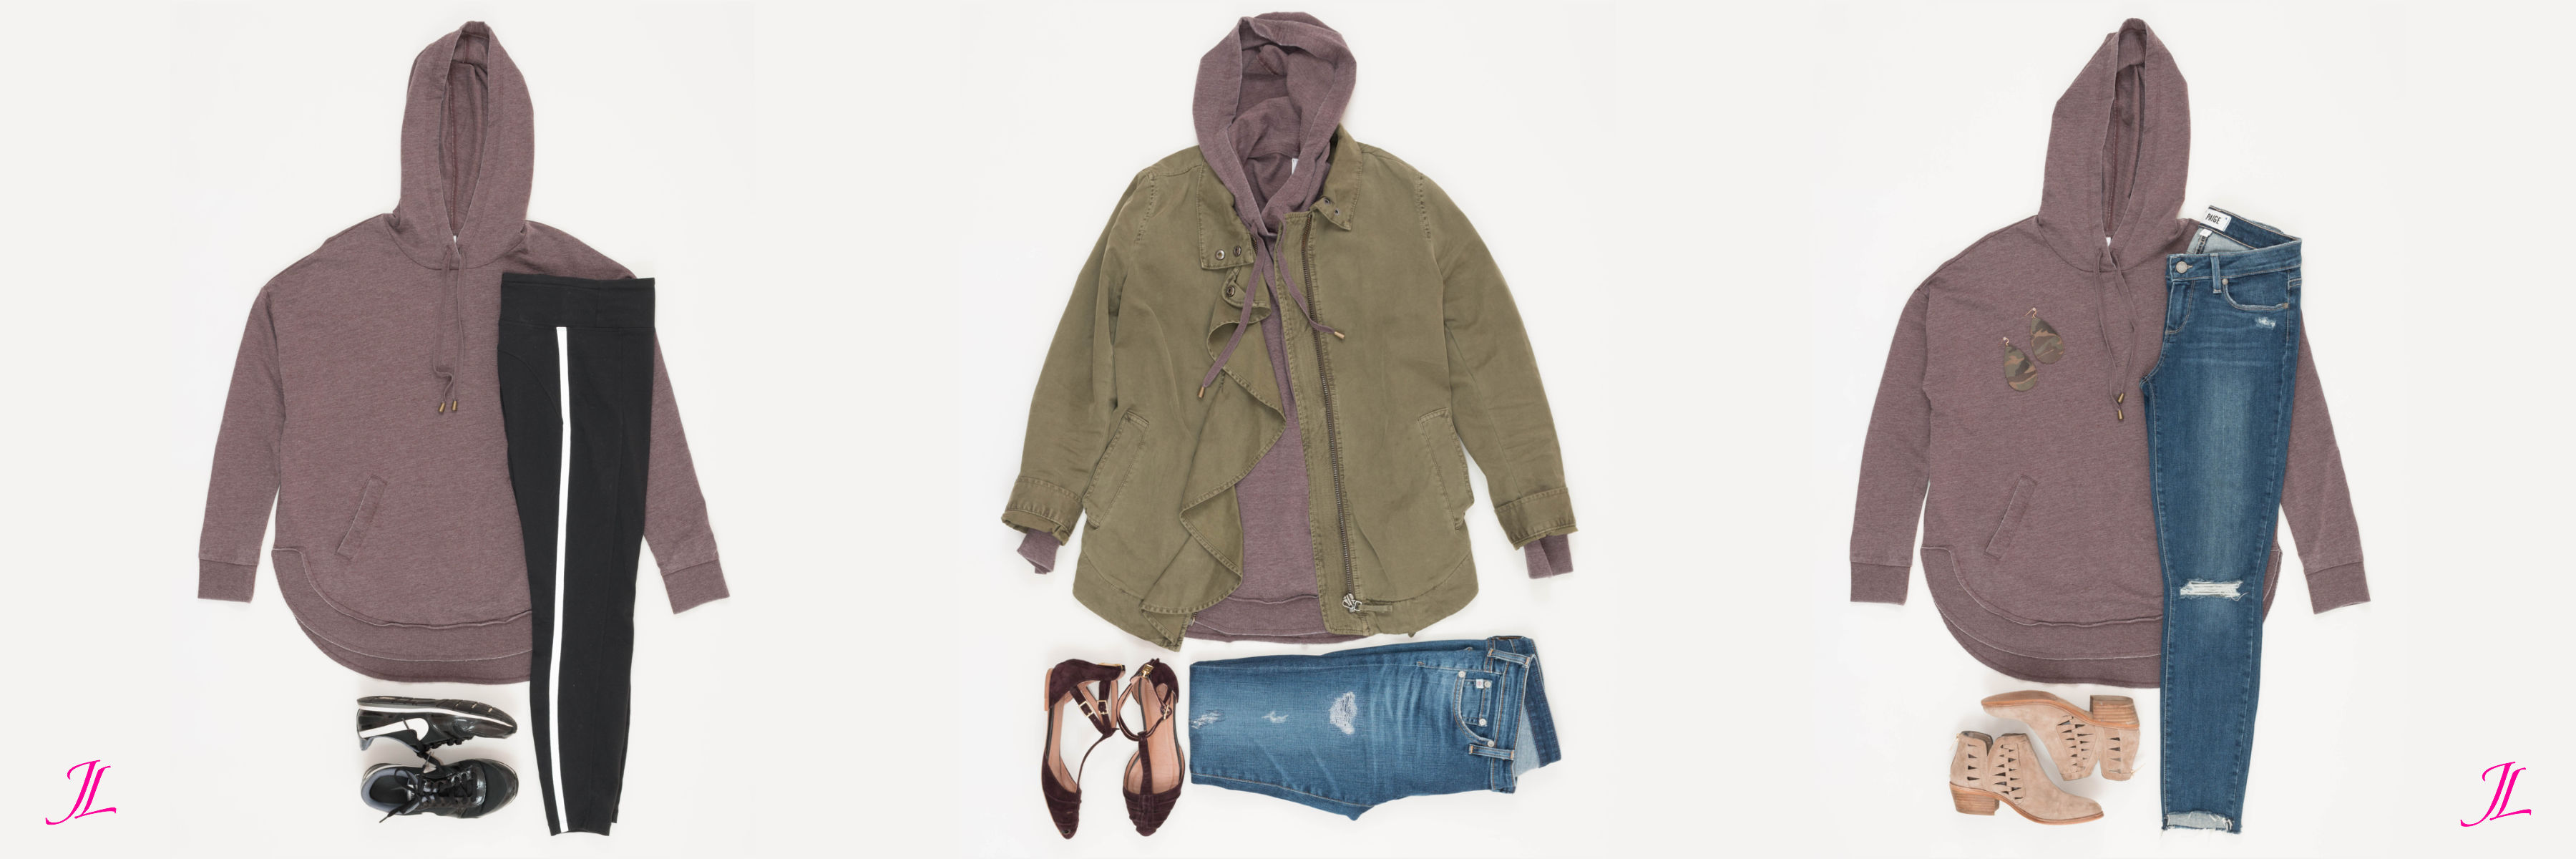 3 outfits with hoodie. 1. Hoodie with leggings that have a white stripe down the side and some Nike black retro tennis shoes. 2. Hoodie with green utility jacket that has a ruffle down the front with destroyed denim and Joie t-strap wine colored flats. 3. Hoodie with ripped at the knee jeans and tan booties.